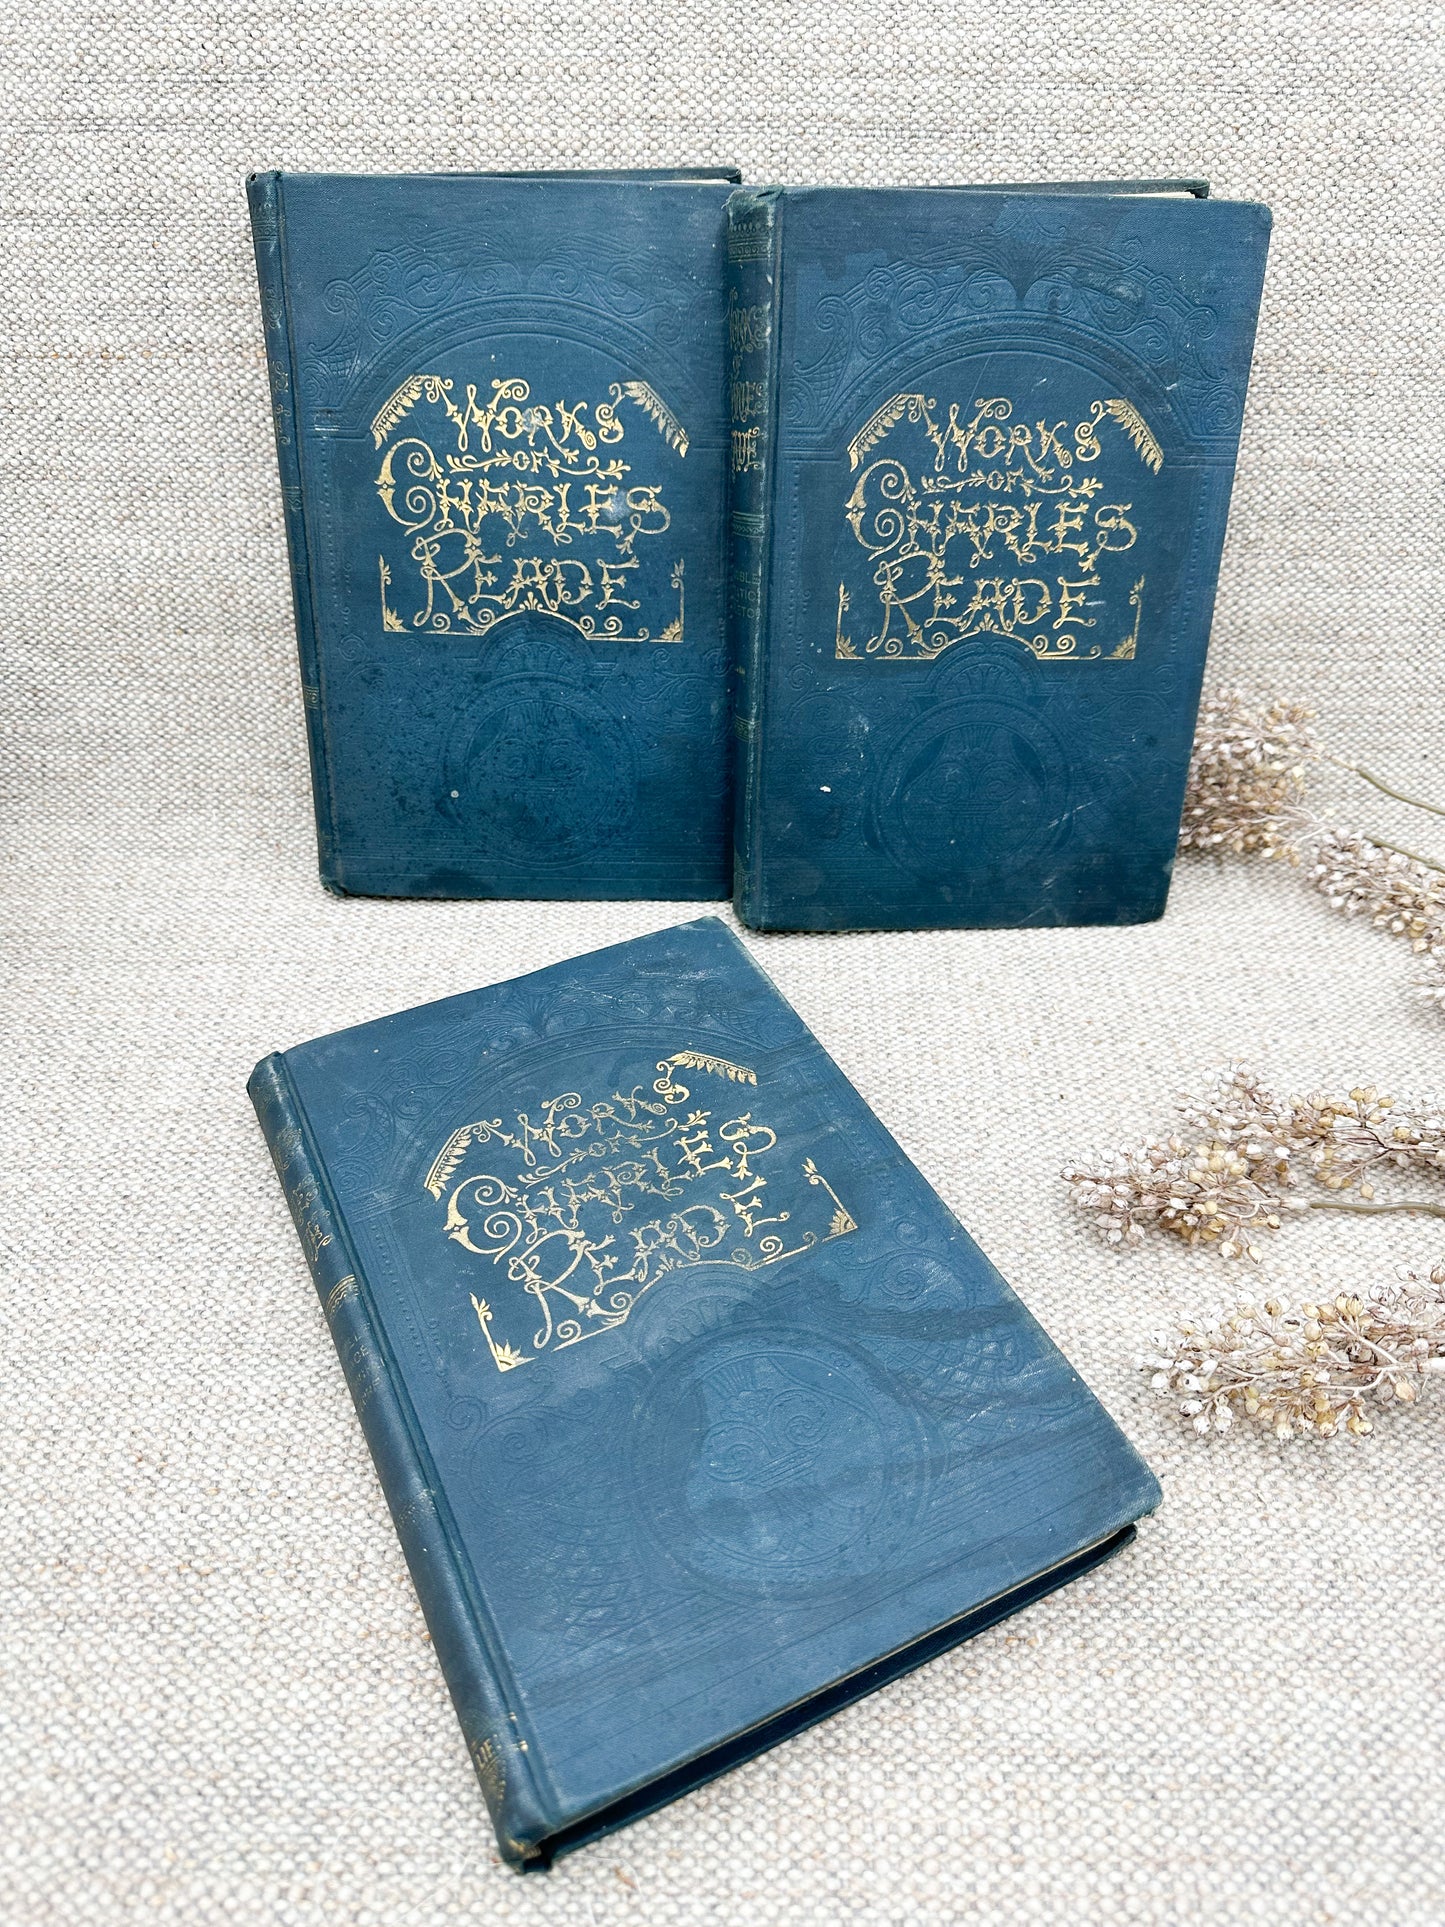 Charles Reade Book (Three Available)